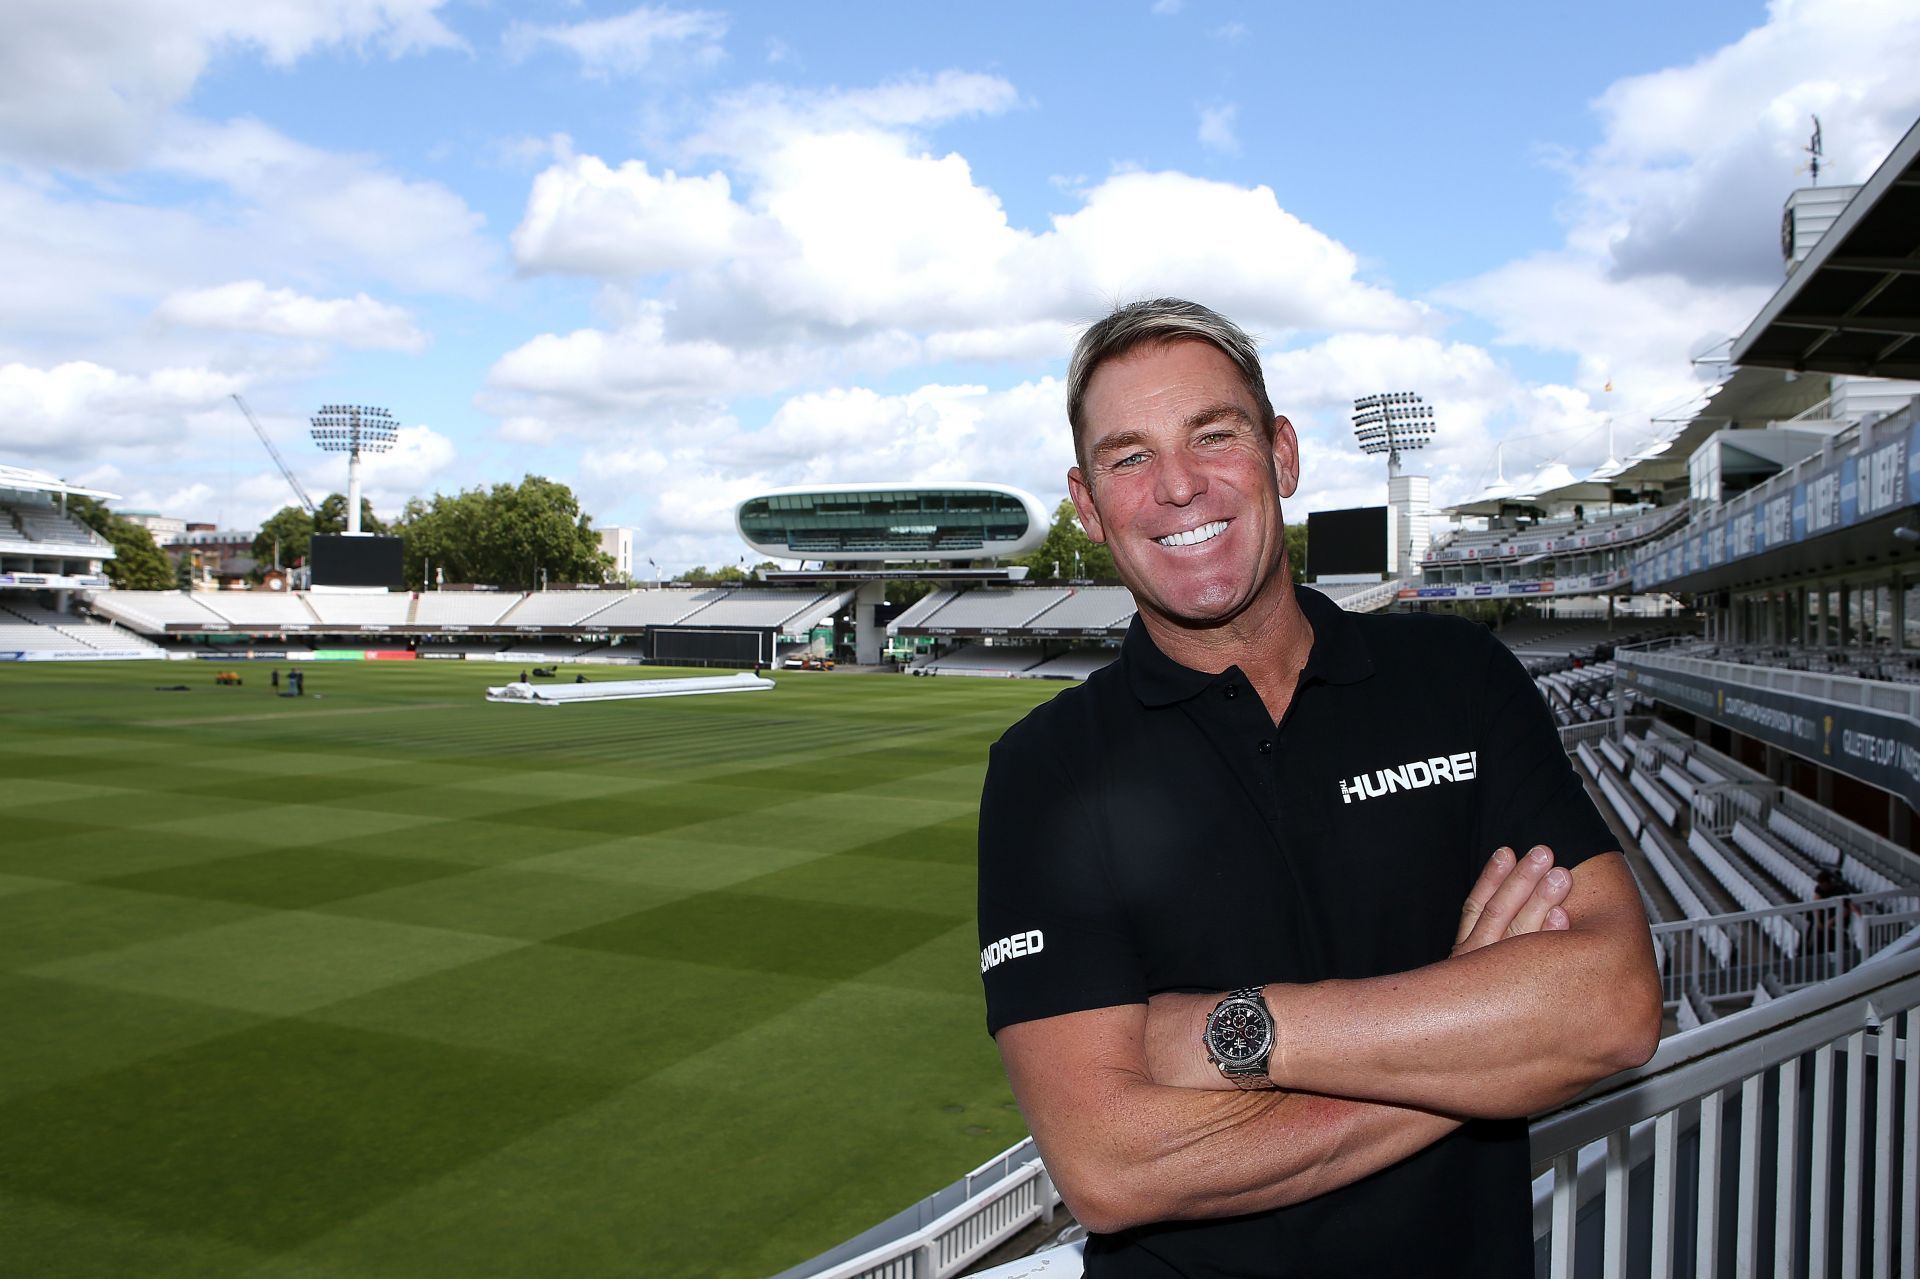 Shane Warne expressed his willingness to coach English team before death